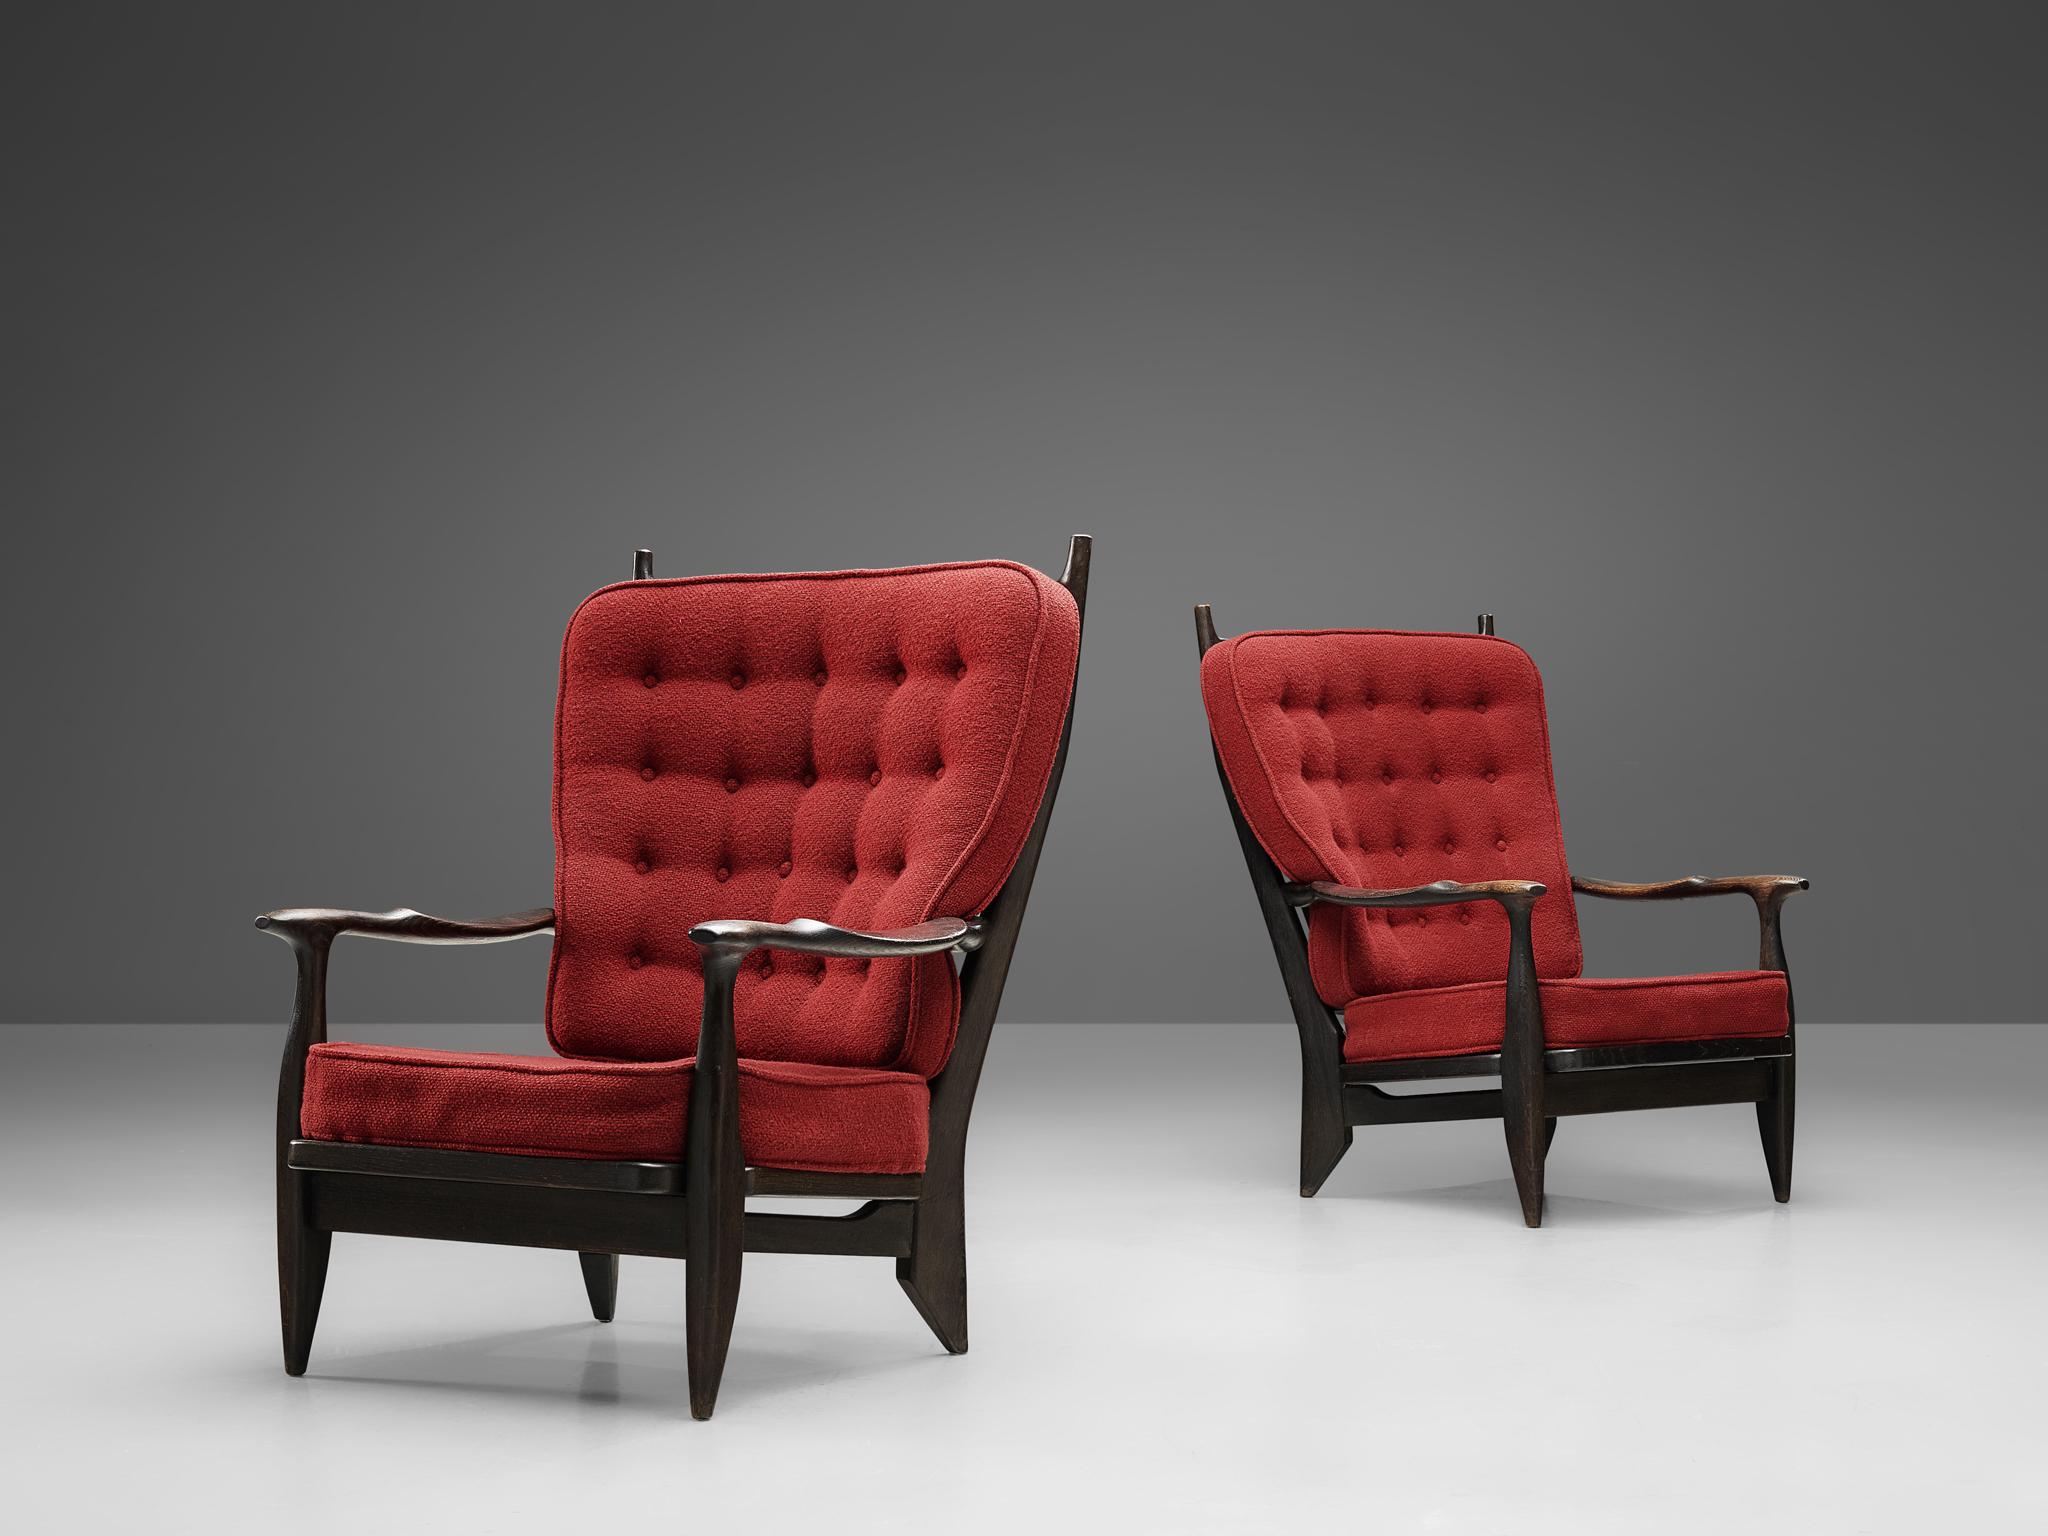 Guillerme et Chambron, set of two lounge chairs oak, red upholstery, darkened oak, France, 1960s.

Guillerme and Chambron are known for their high quality solid oak furniture, of which these two lounge chairs are another great example. These chairs